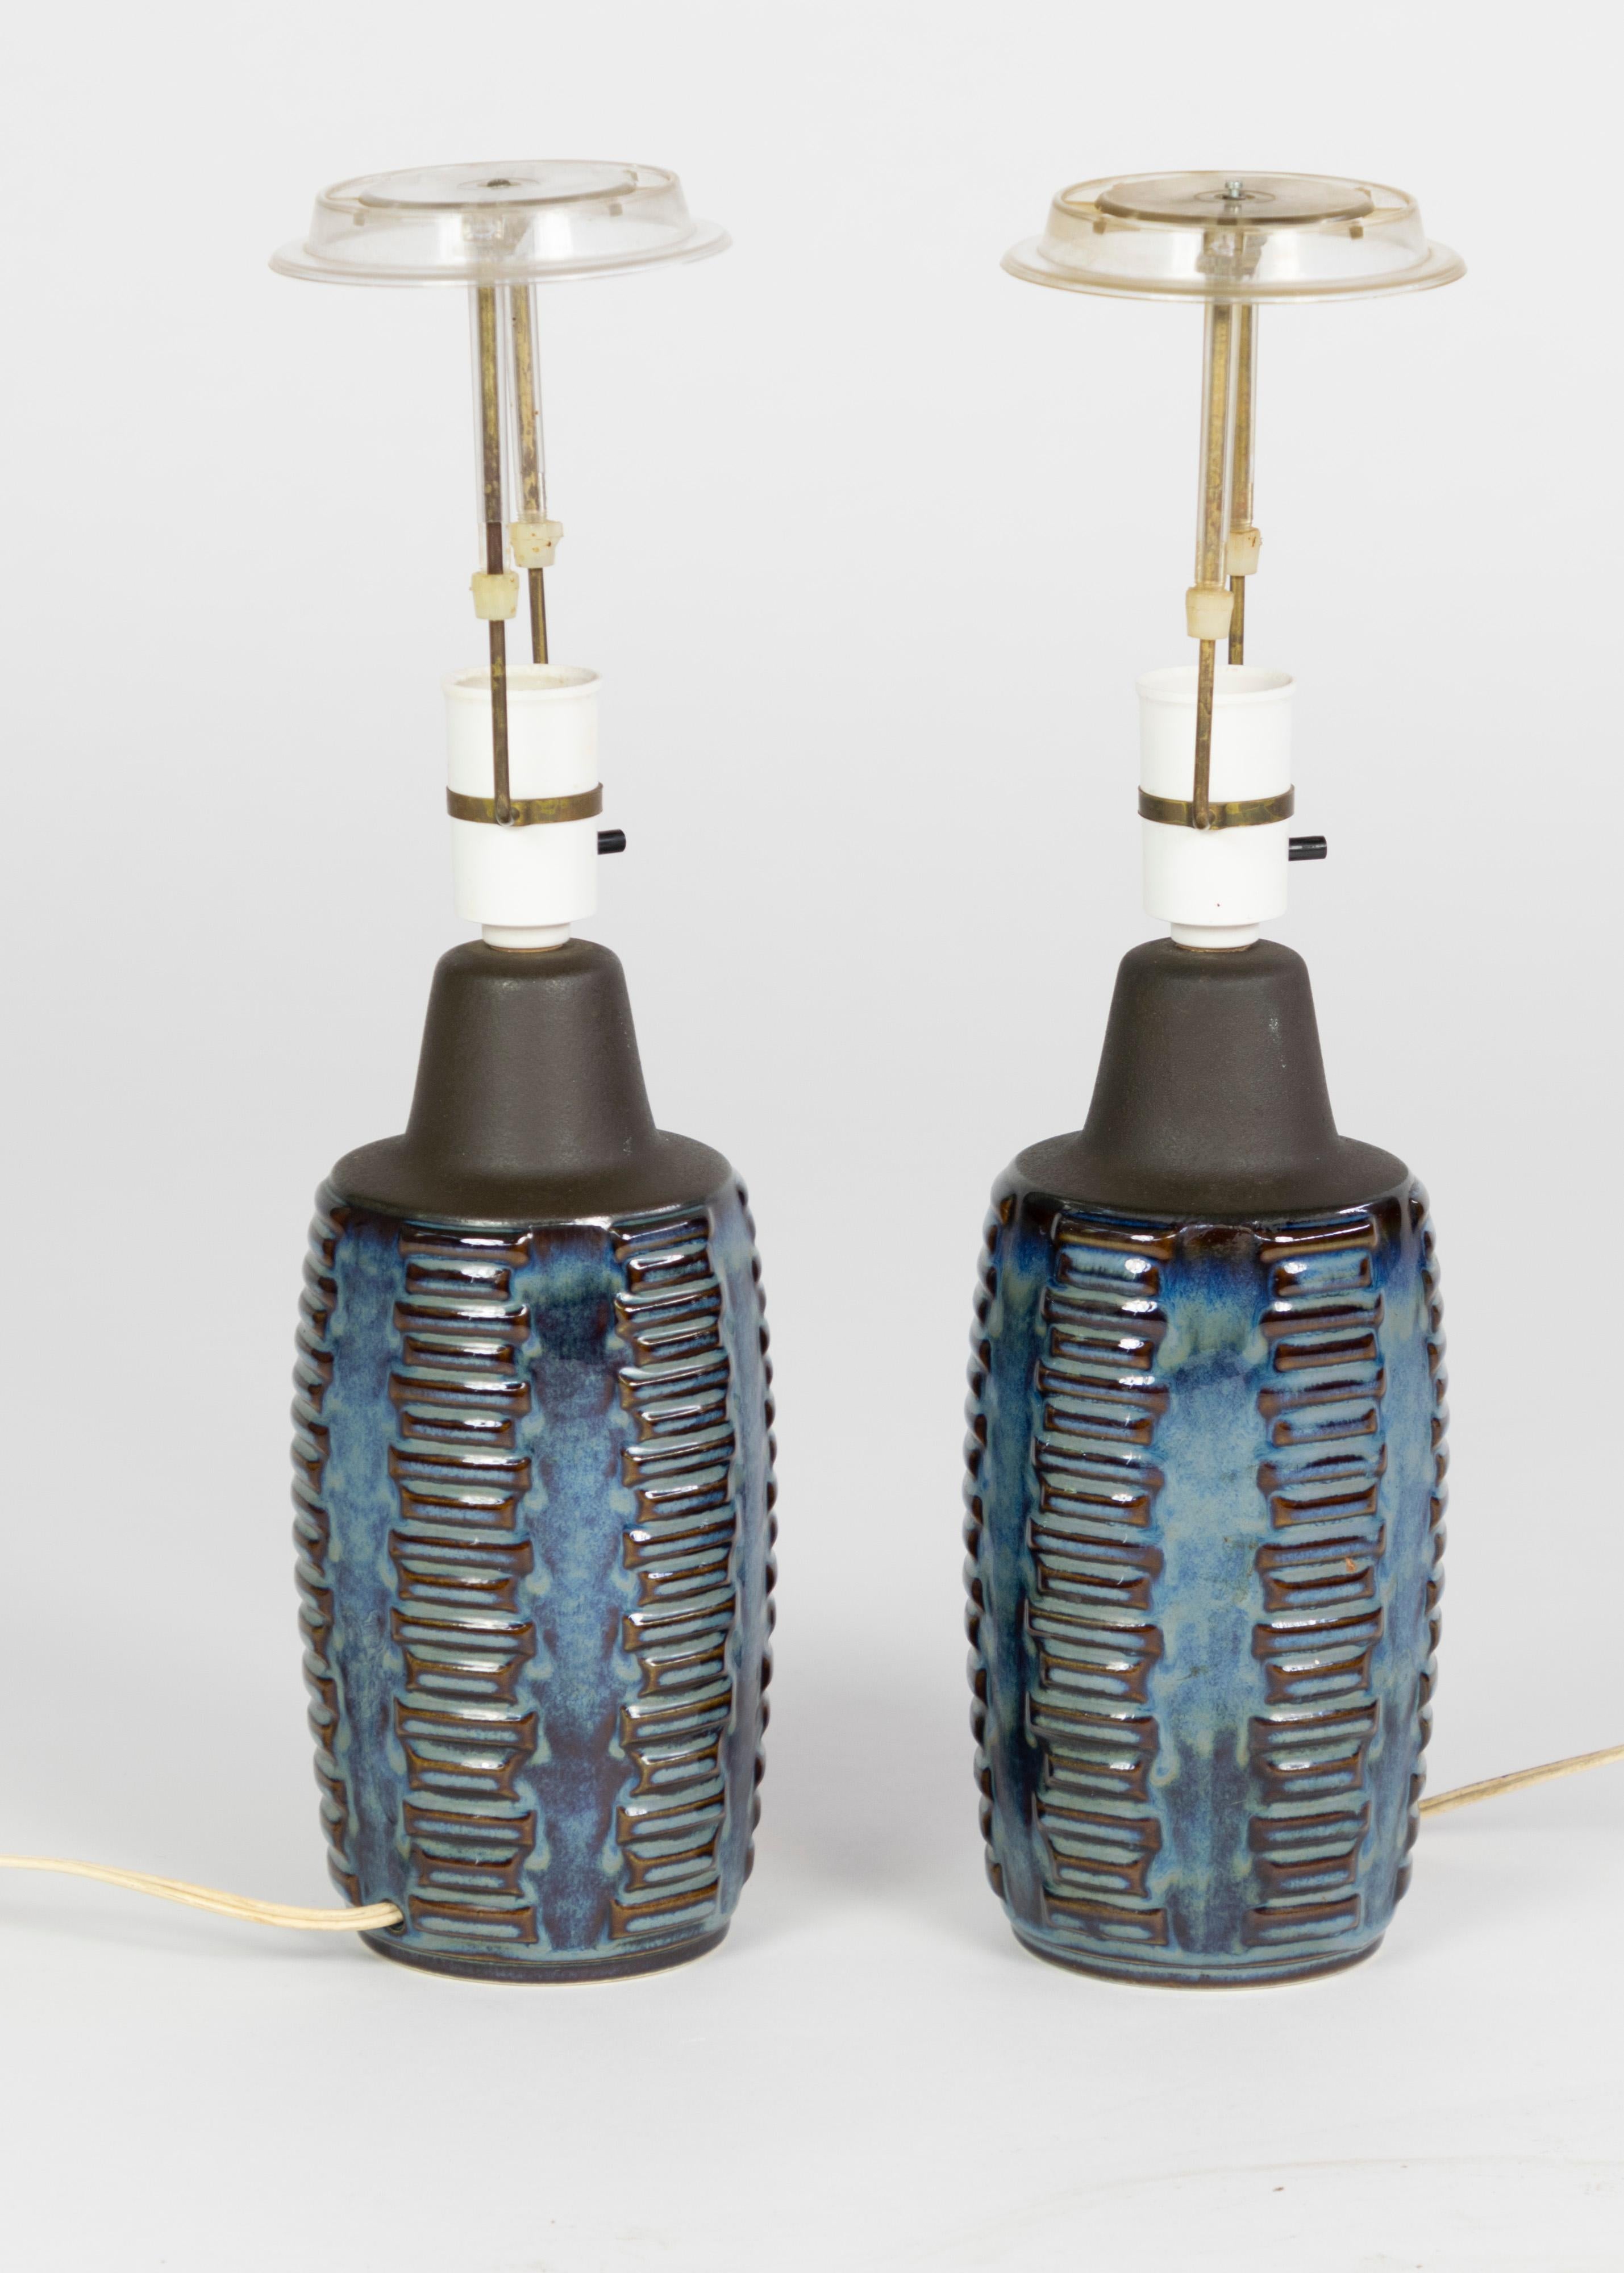 Pair of midcentury table lamps in blue ceramics by Einer Johansen for Soholm. 
Manufactured in the 1960s.
Very nice condition, signed under the stam, original shade holders are included. 

 